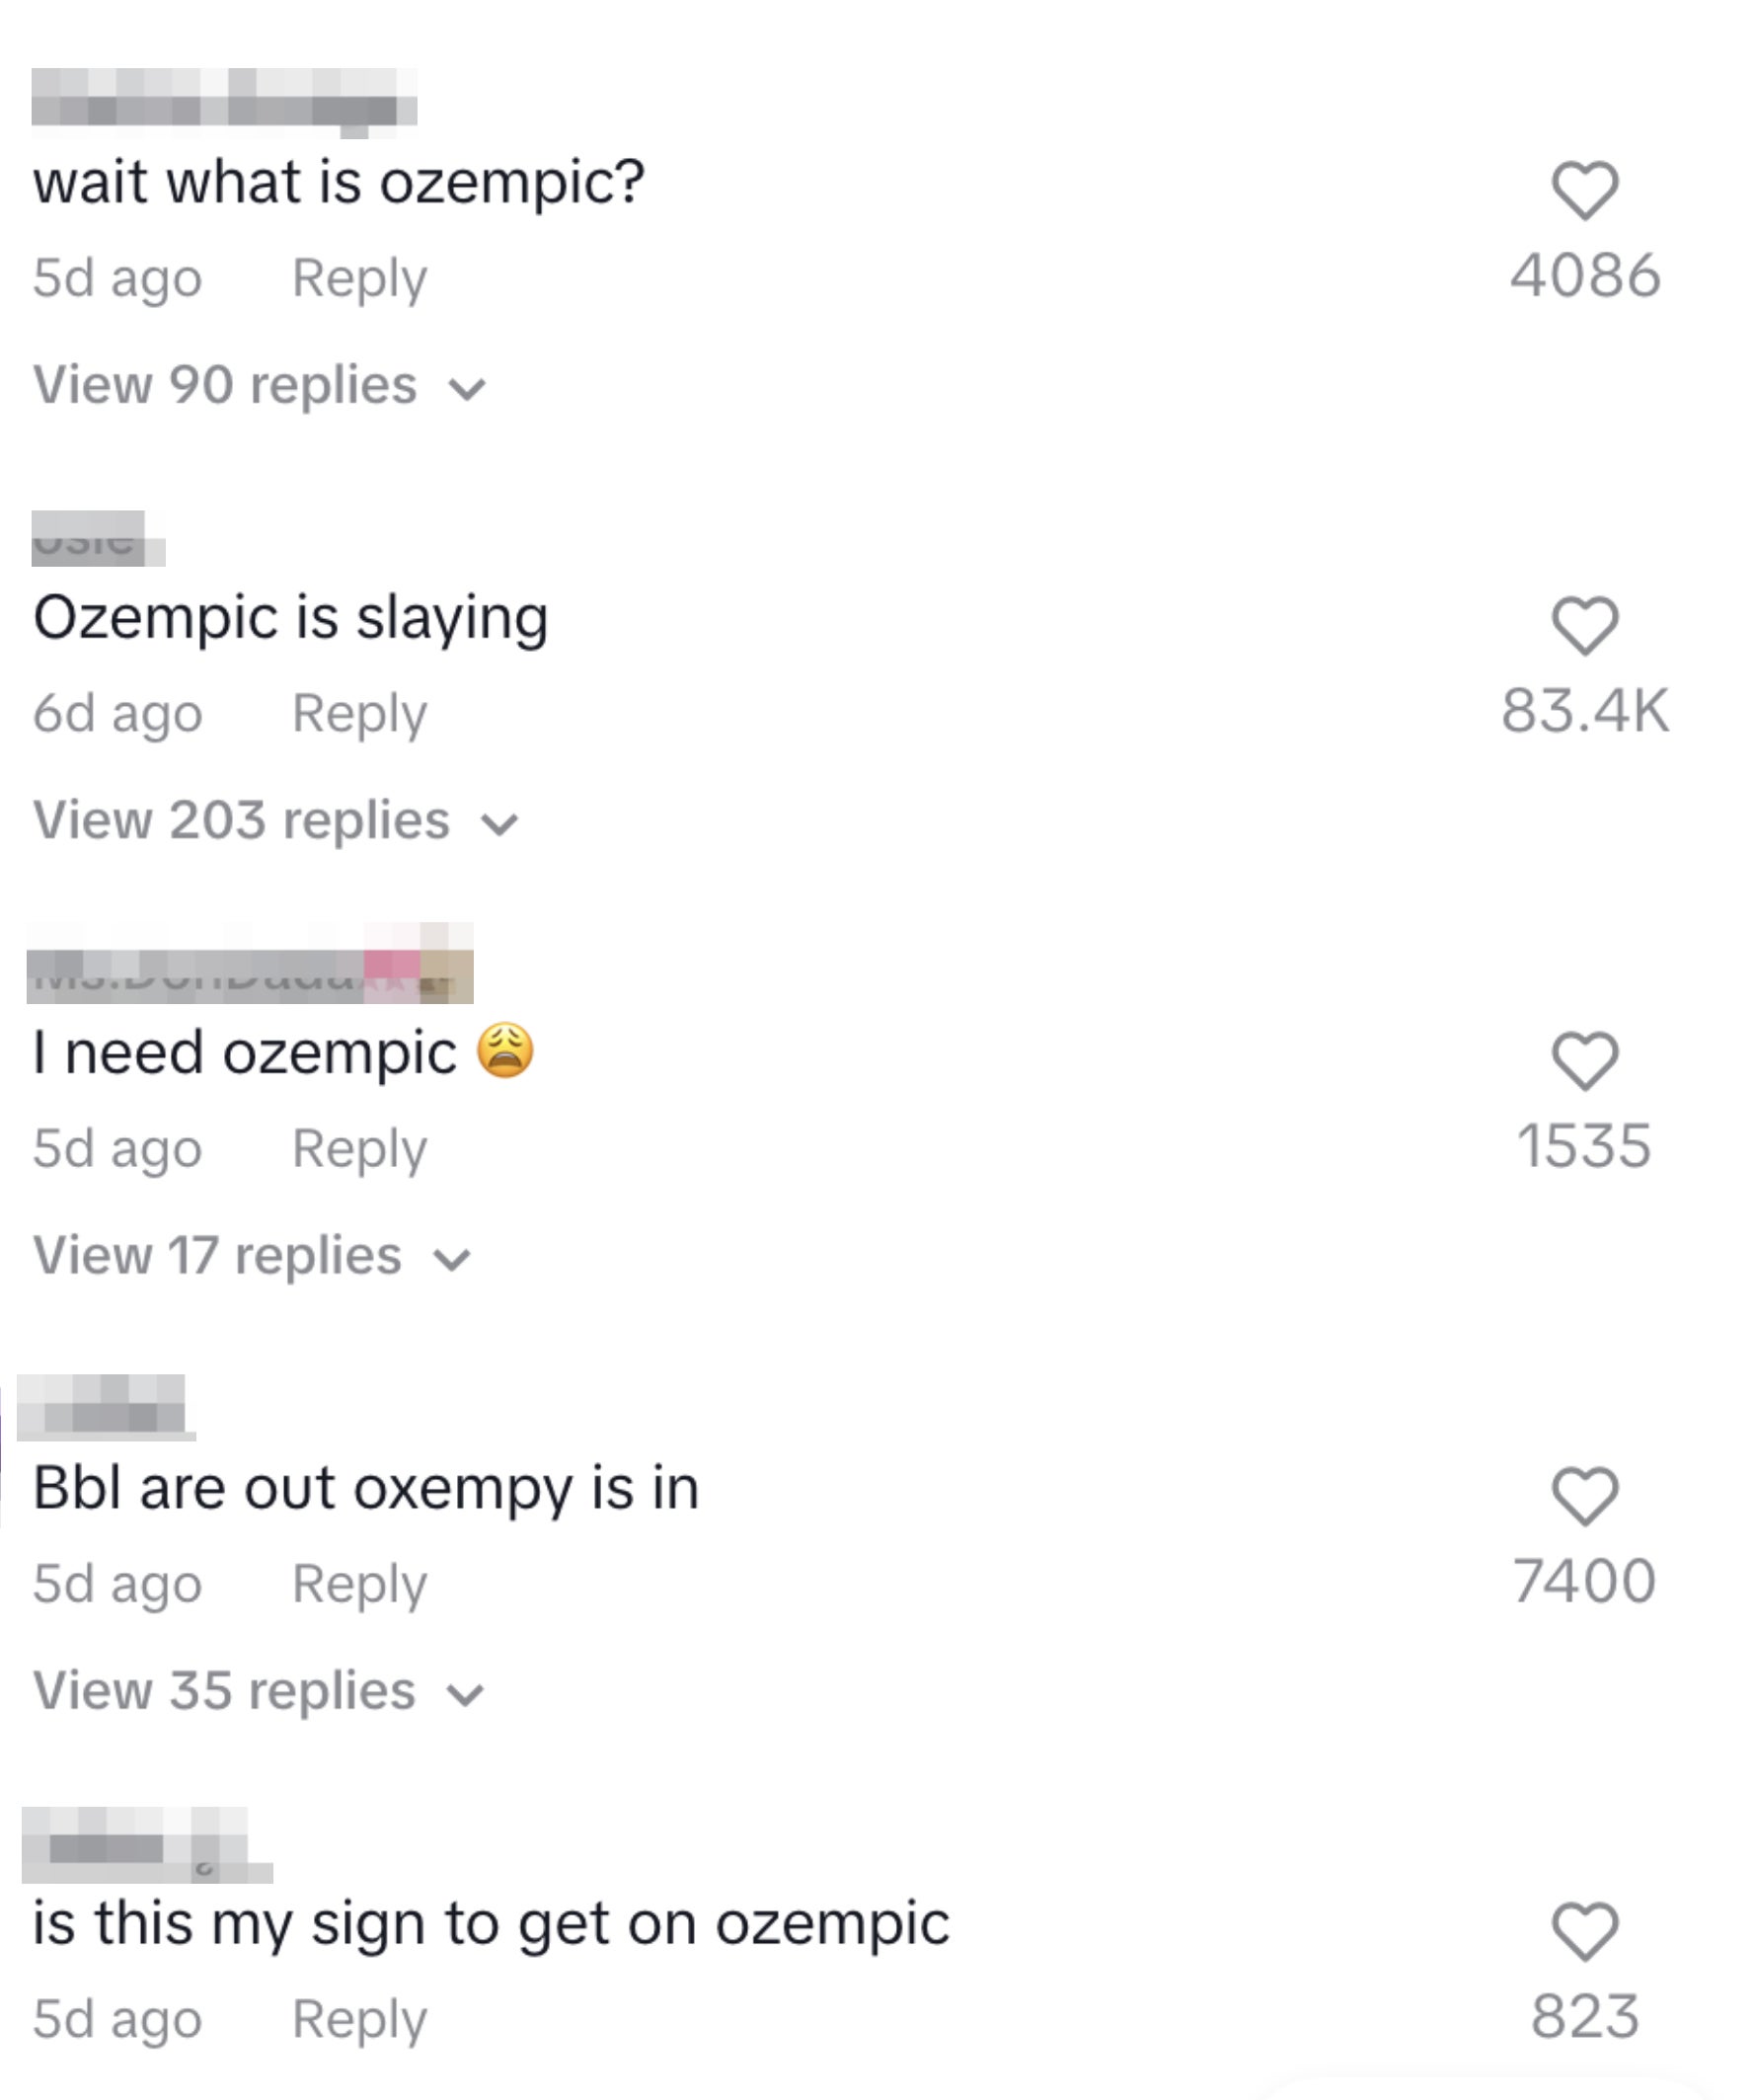 Comments on a post asking about Ozempic, with various users engaging and one questioning what Ozempic is